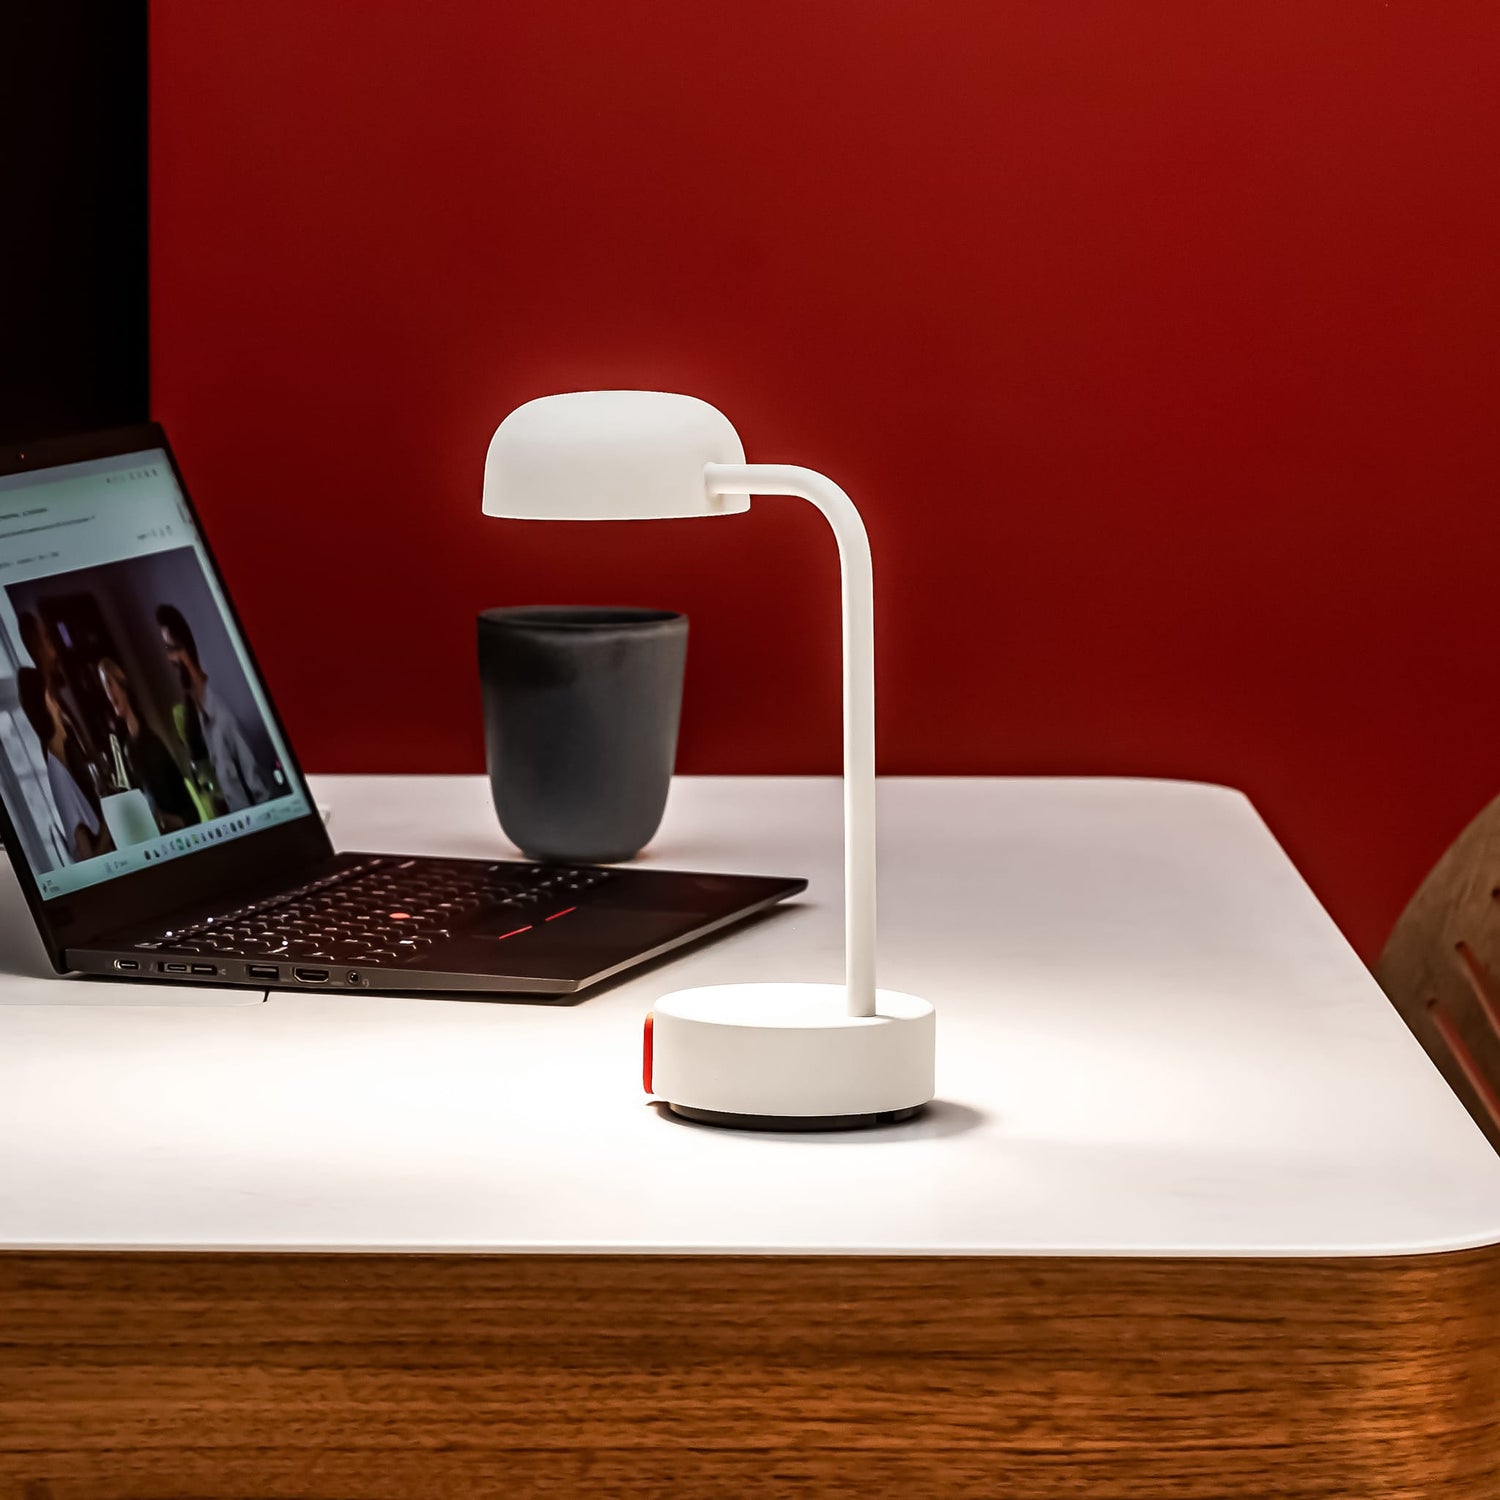 Fokus Cloudy White by Kooduu, dimmable LED lamp for Canadian work and leisure.